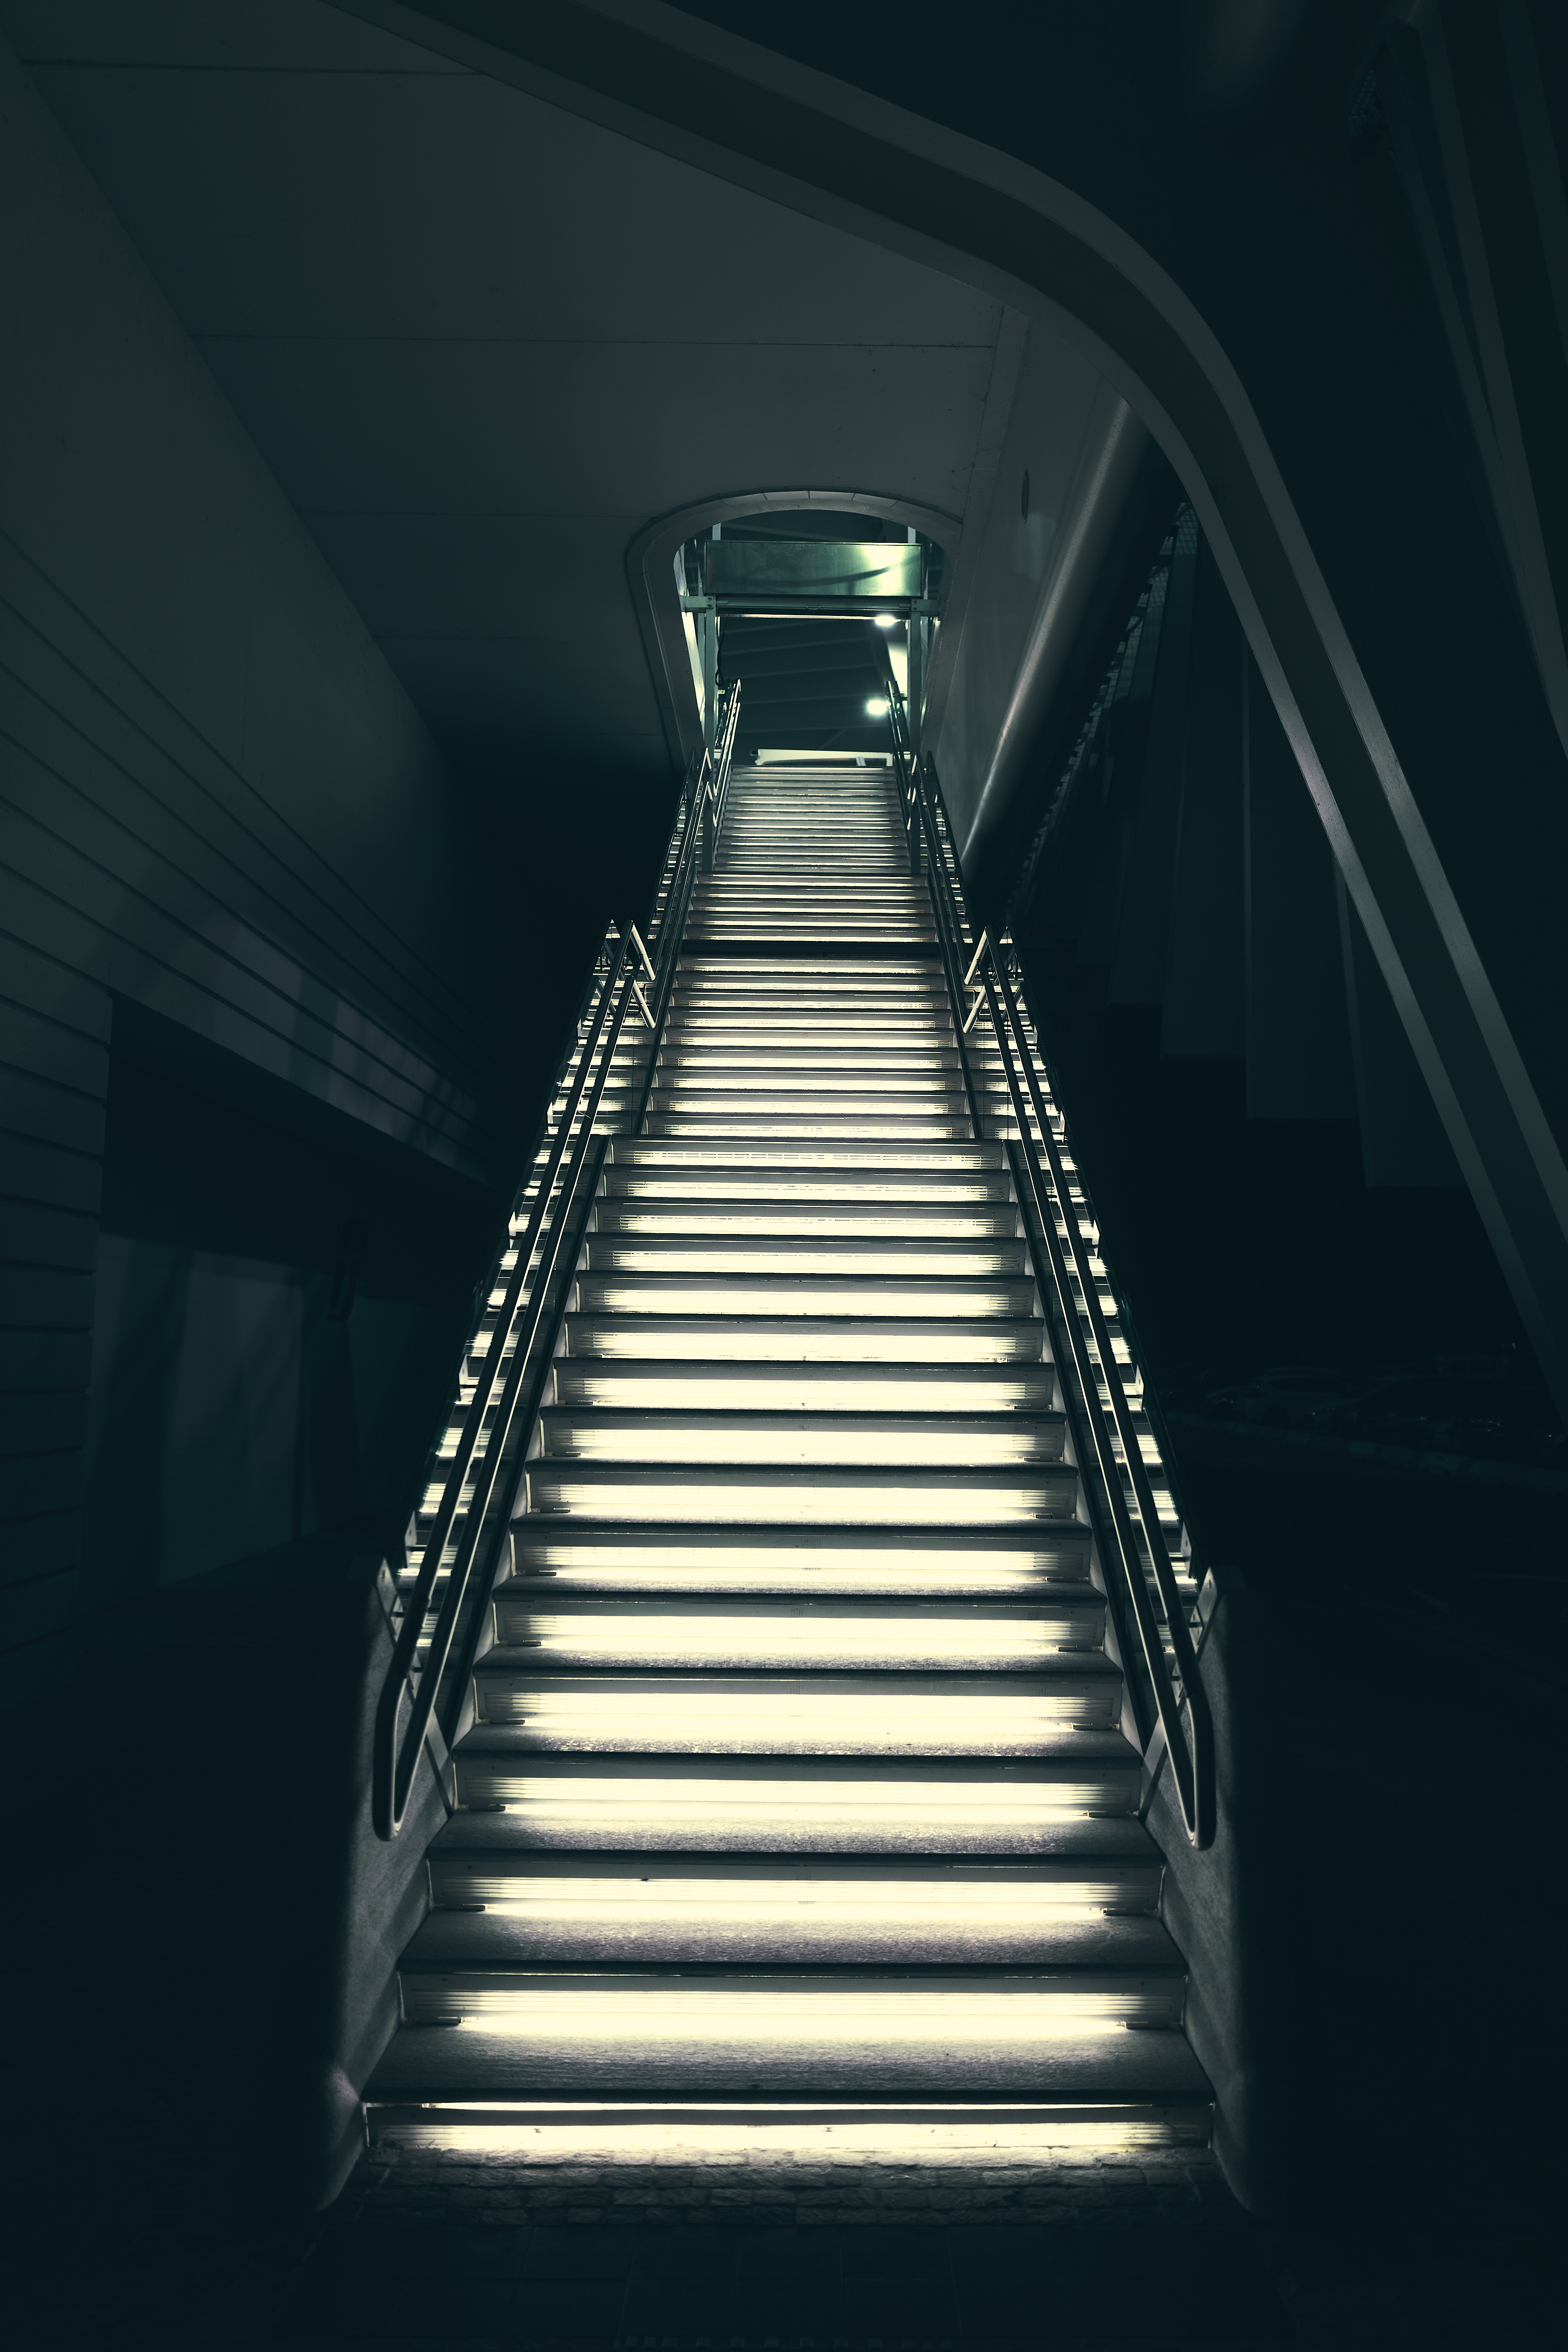 New Lock Screen Wallpapers backlight, miscellanea, miscellaneous, illumination, stairs, ladder, output, exit